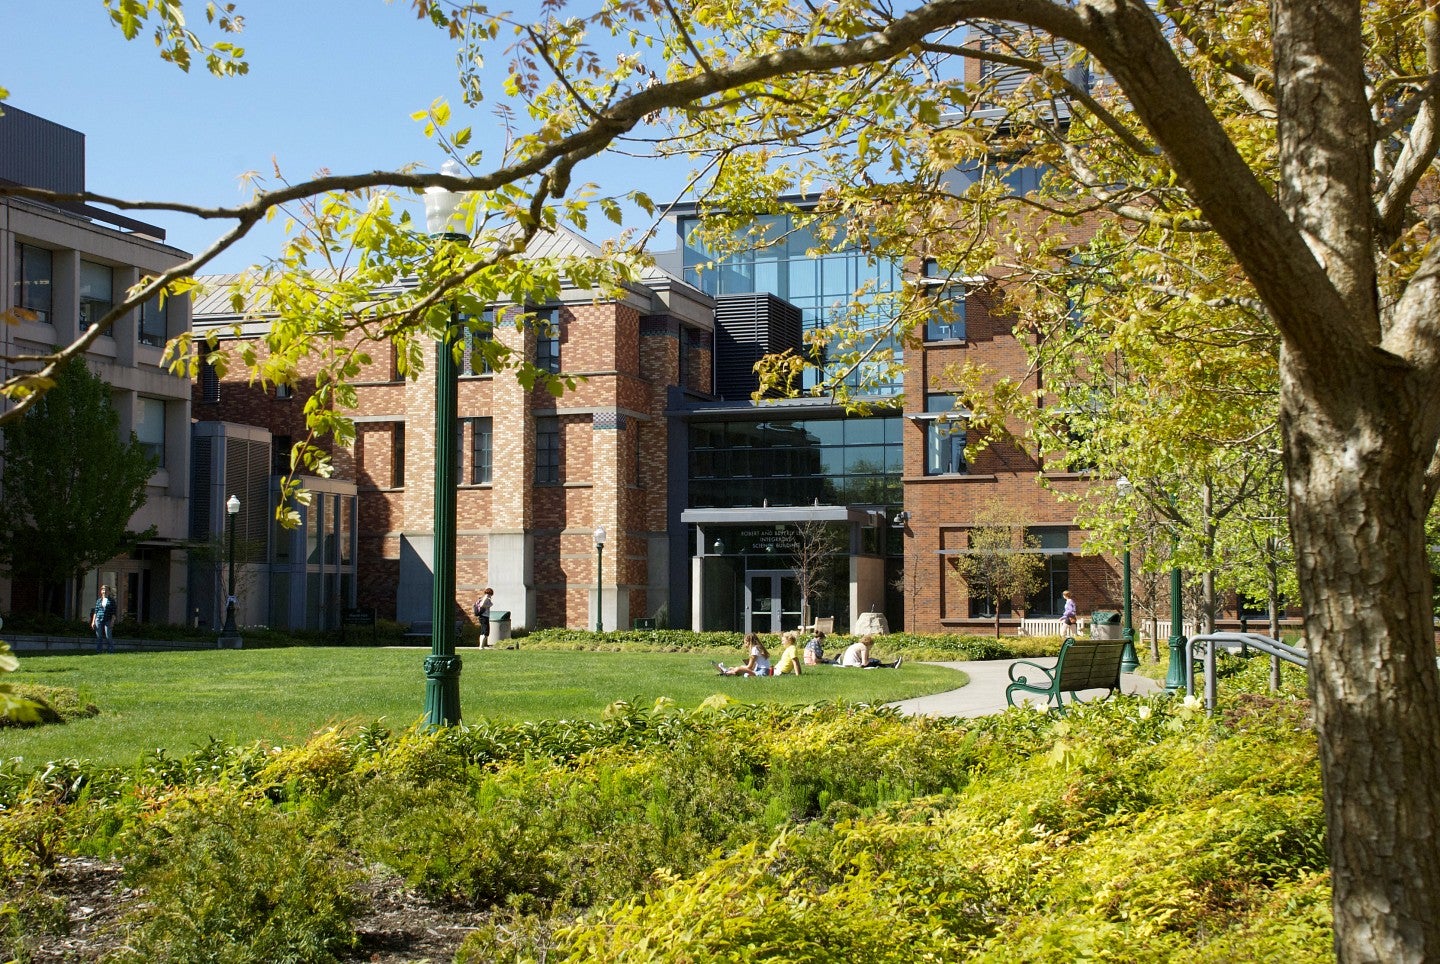 Activity around main entrance of the Lewis Integrative Sciences Building on the UO campus